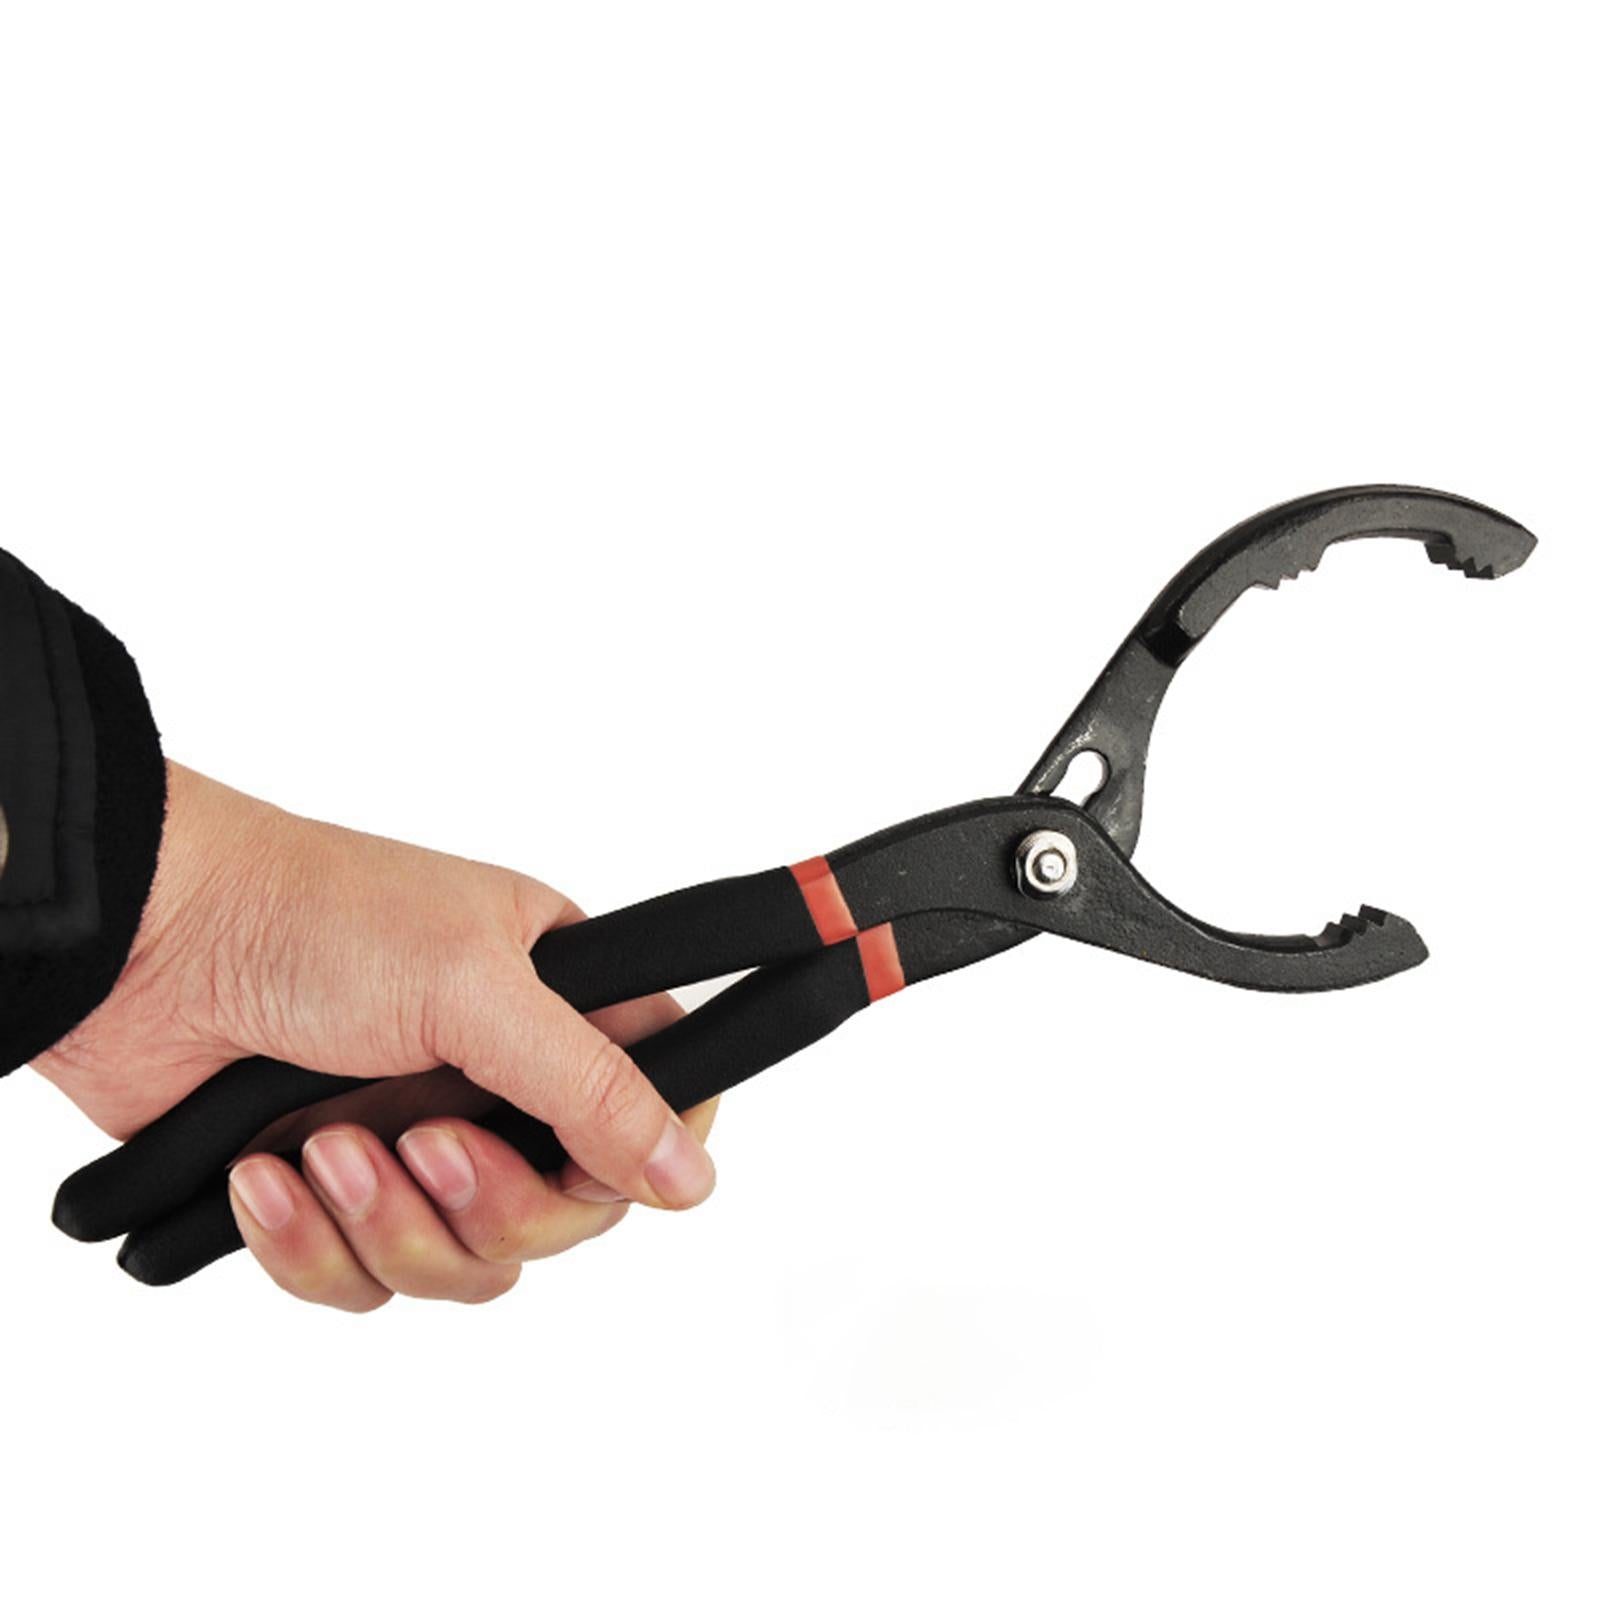 12 inch Oil Filter Wrench Useful Household Repair Tool Convenient Durable